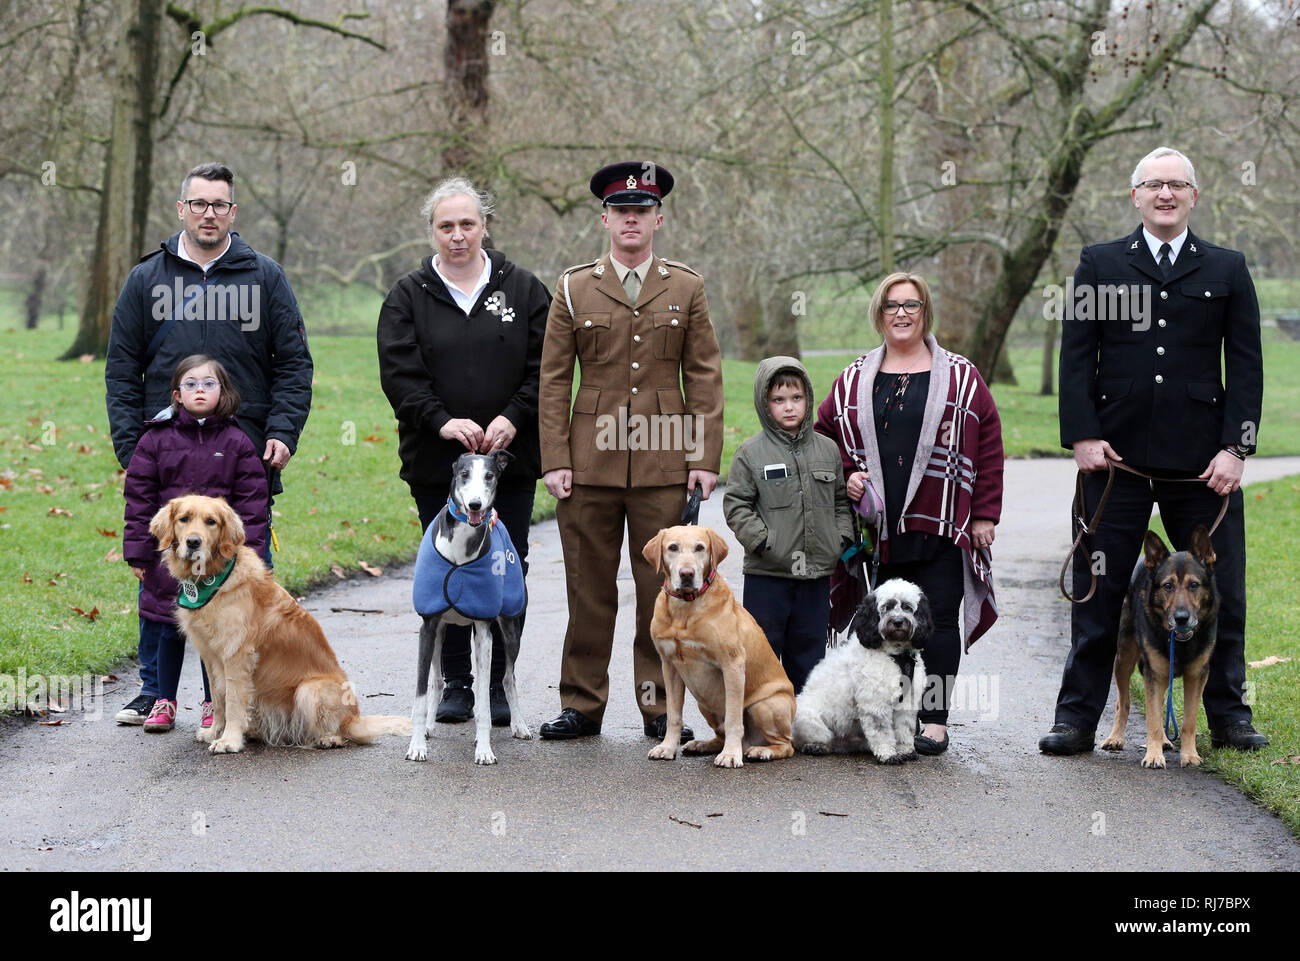 The finalists for the prestigious Crufts dog hero competition, Friends for Life 2019, (left to right) Steve Gunn, his daughter Milli and their dog Emma, Sarah Candy and her dog Ringo, Private Lee Hampson and his dog Lance, Becky Gaye, her son Oli, and their dog Snoopy, and PC David Wardell and his dog Finnattend a launch event for this year's Crufts and the Friends for Life dog hero finalists at the Kennel Club in London. Stock Photo